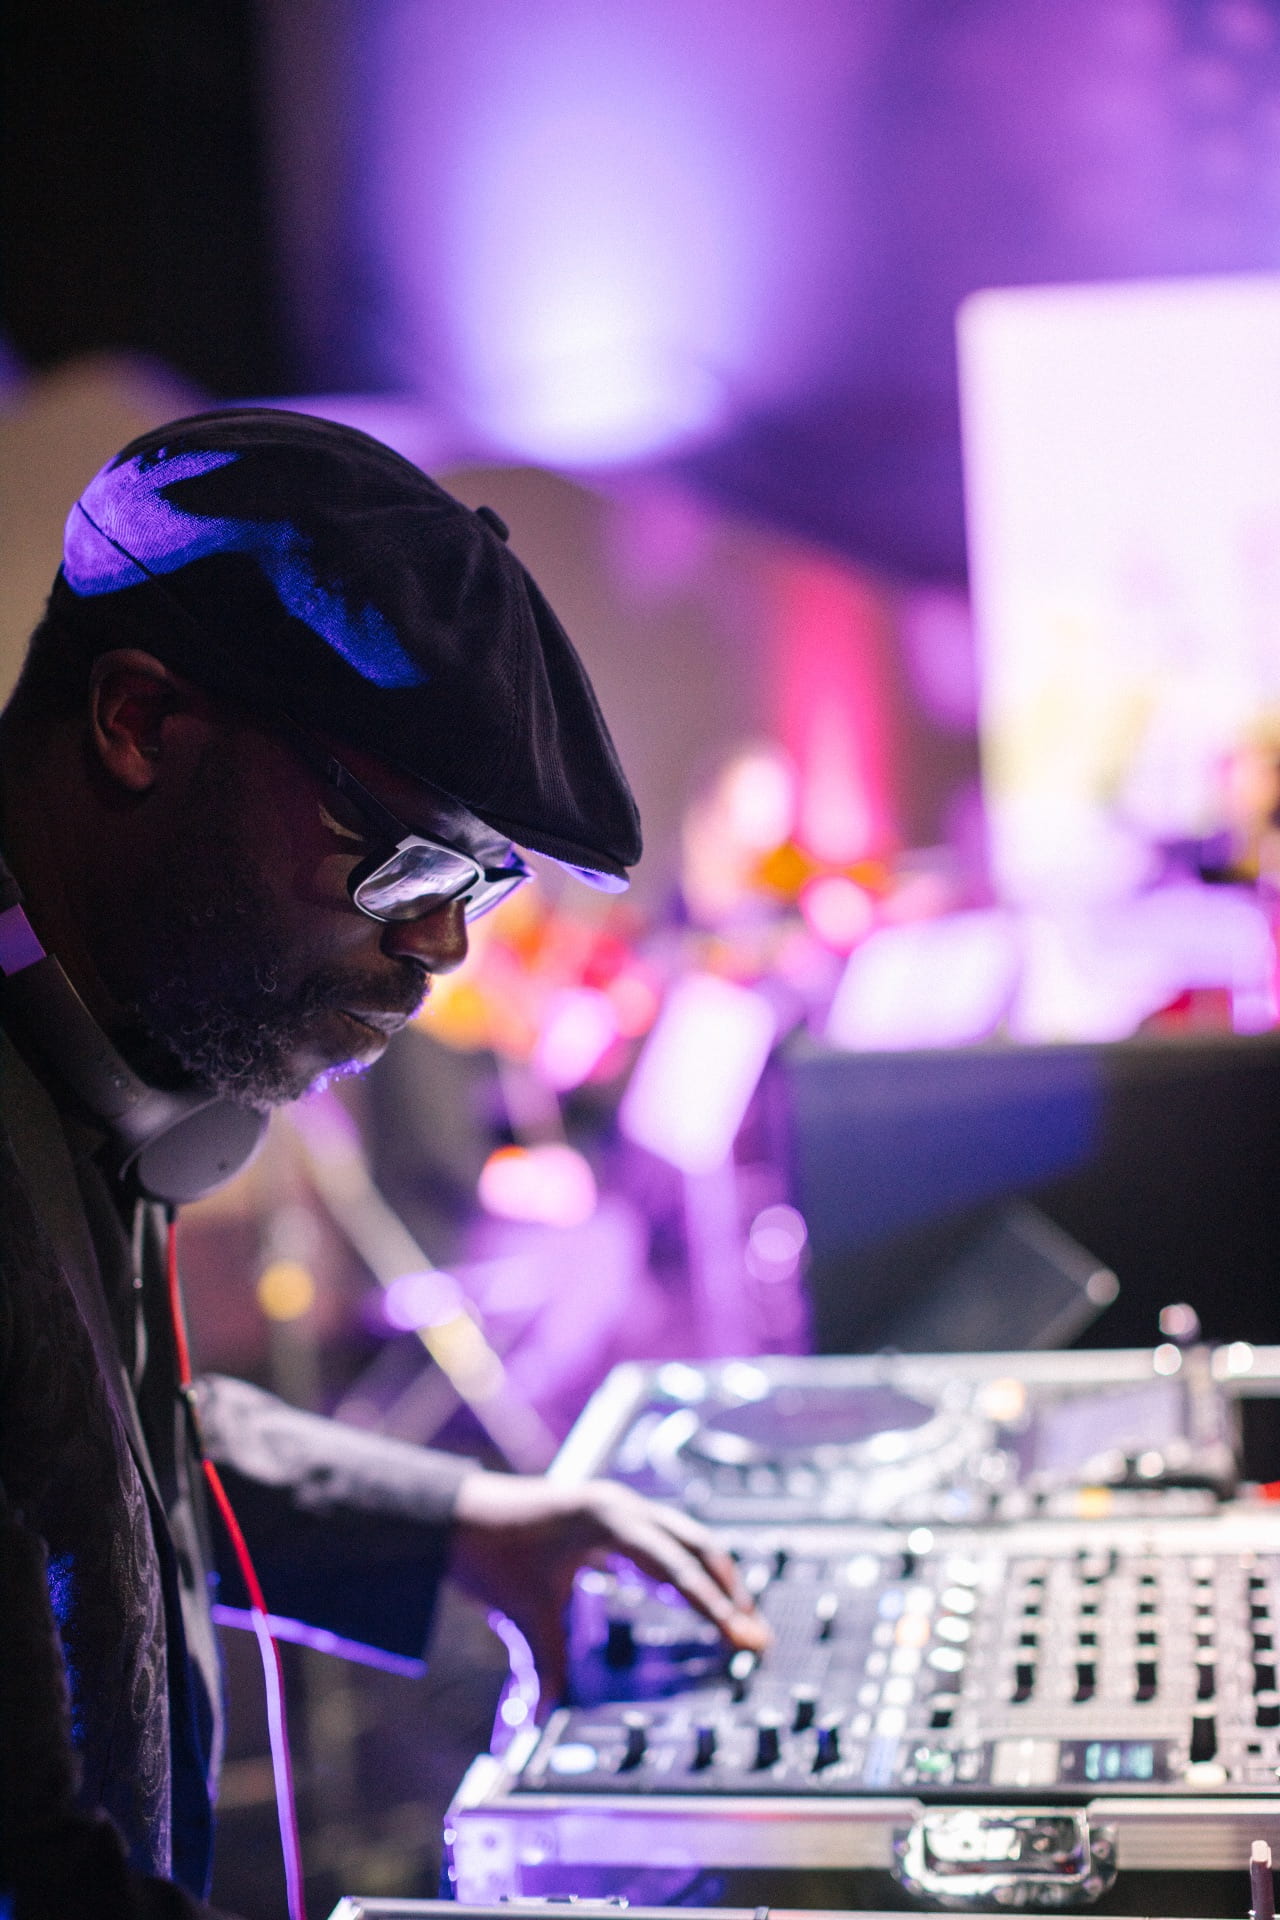 image of Peter adjure playing music from DJ deck with purple lighting around him